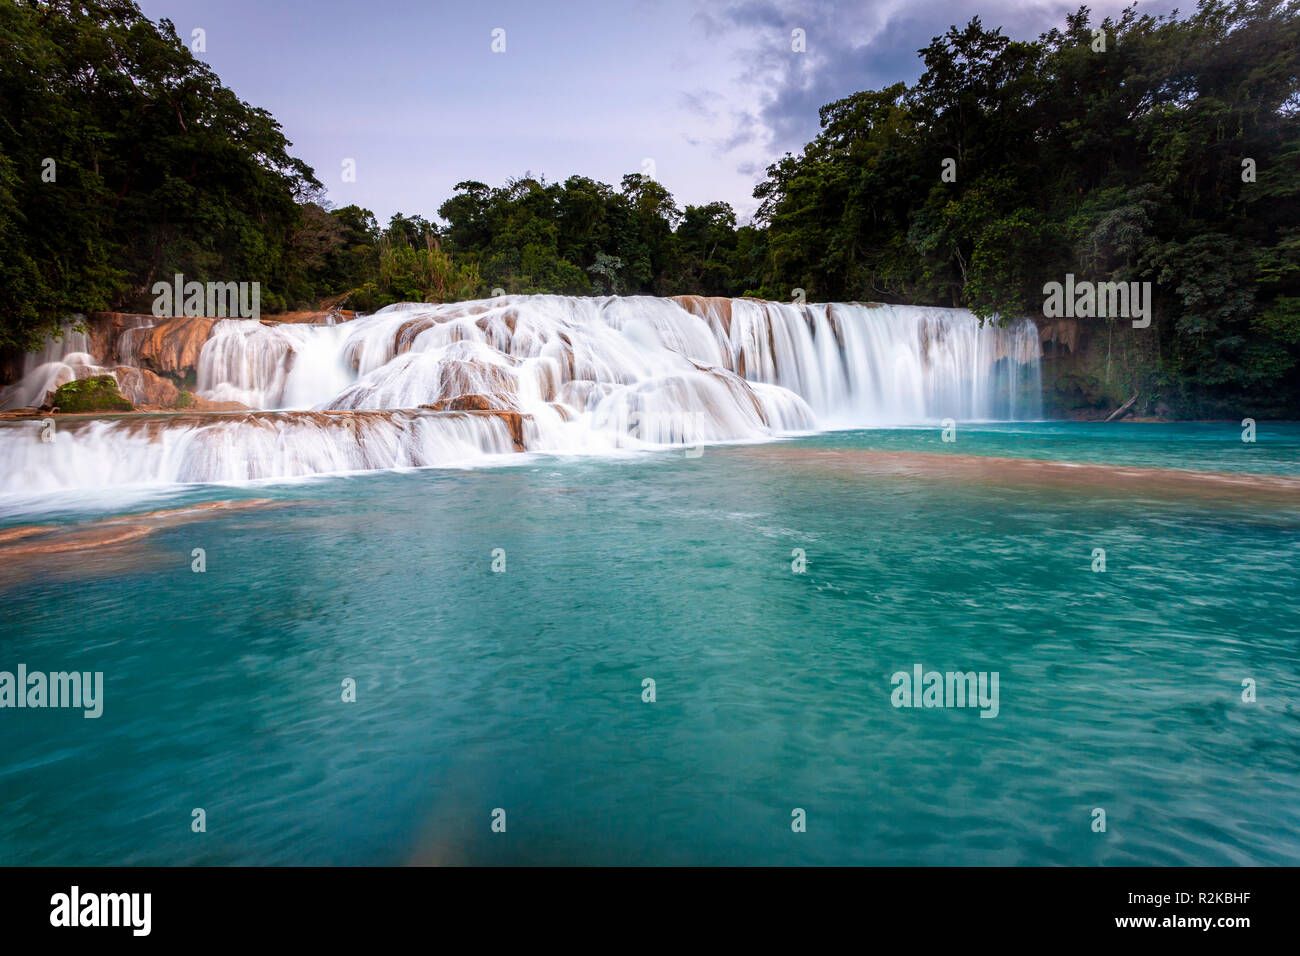 Azure pool of water under one of the many falls at Agua Azul, Chiapas, Mexico. Stock Photo